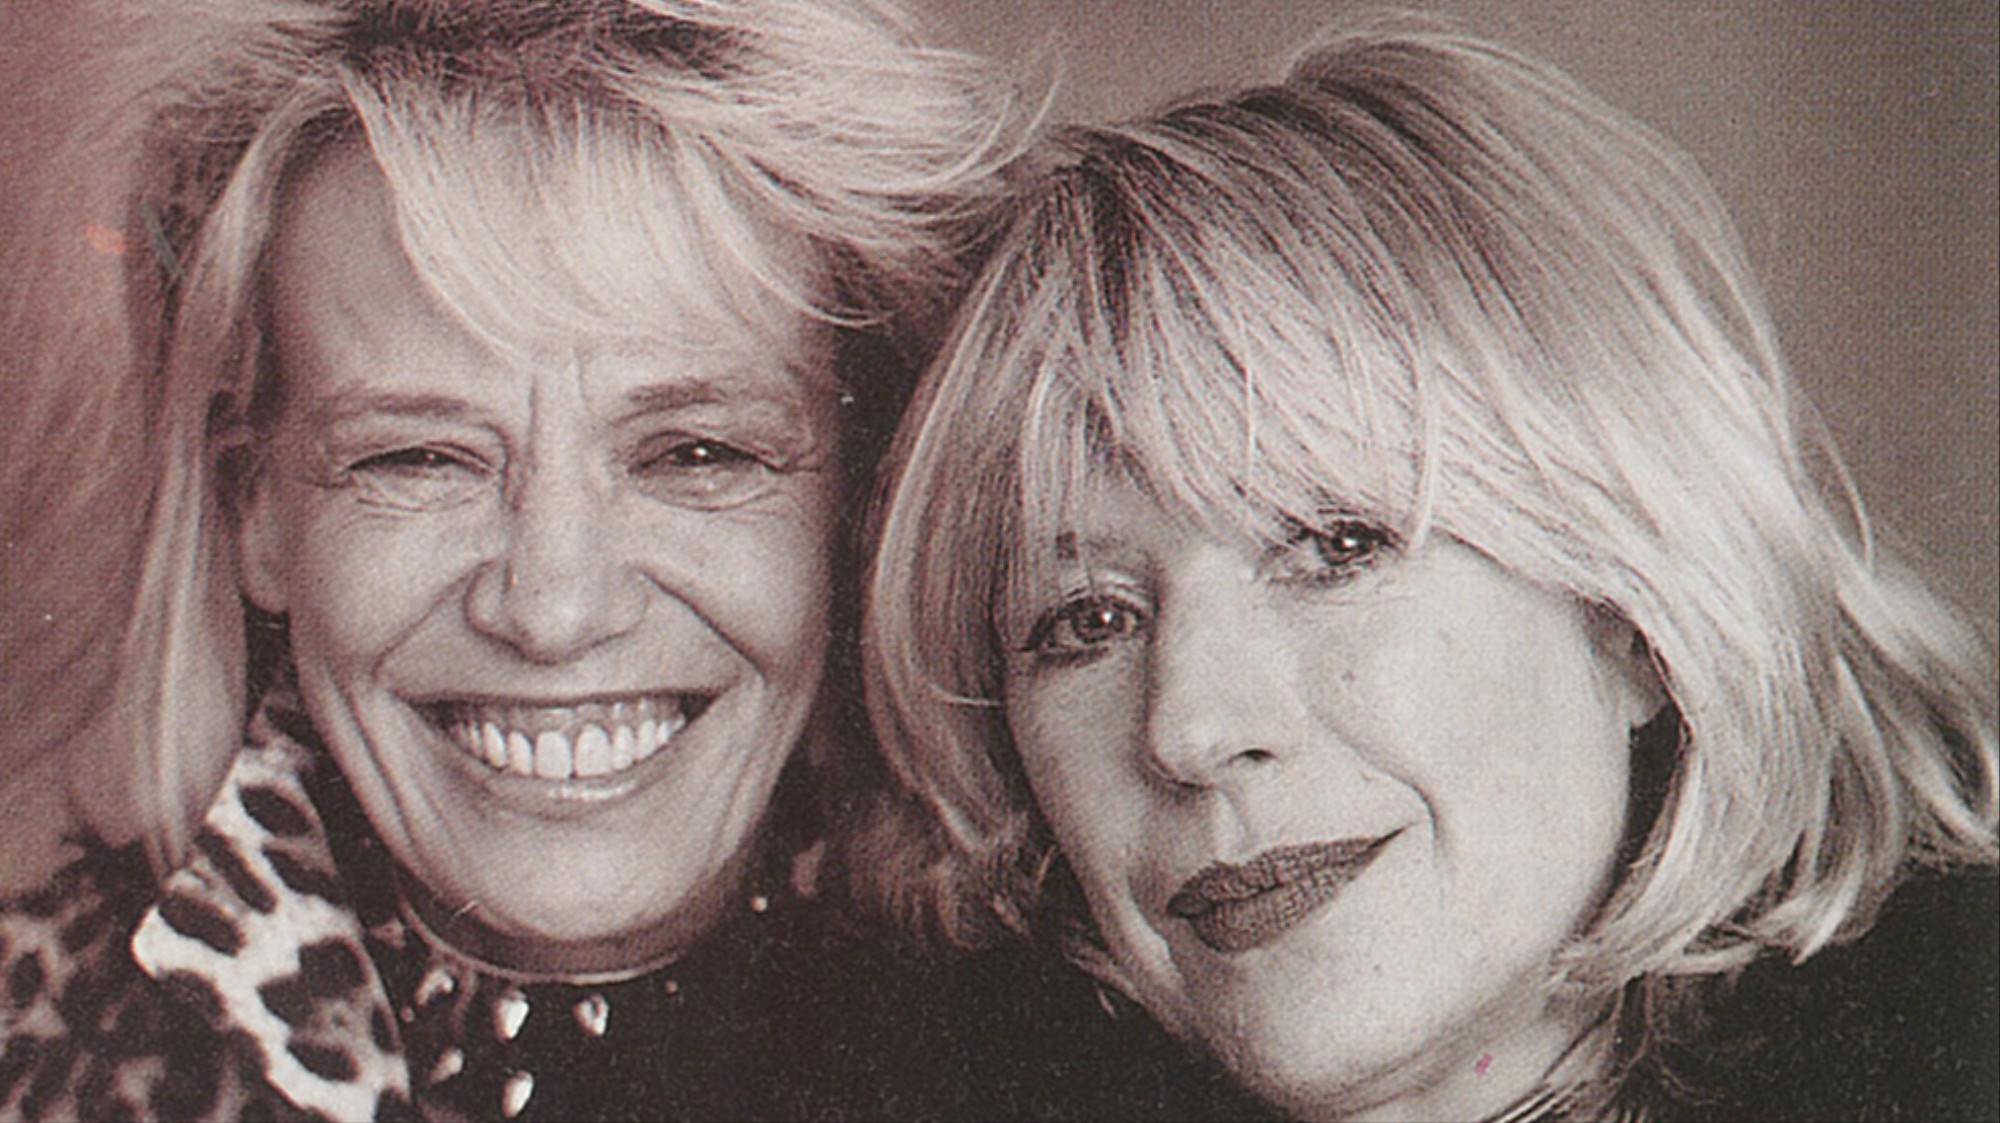 Anita Pallenberg paid a high price for being a rock-star girlfriend |  Suzanne Moore | The Guardian